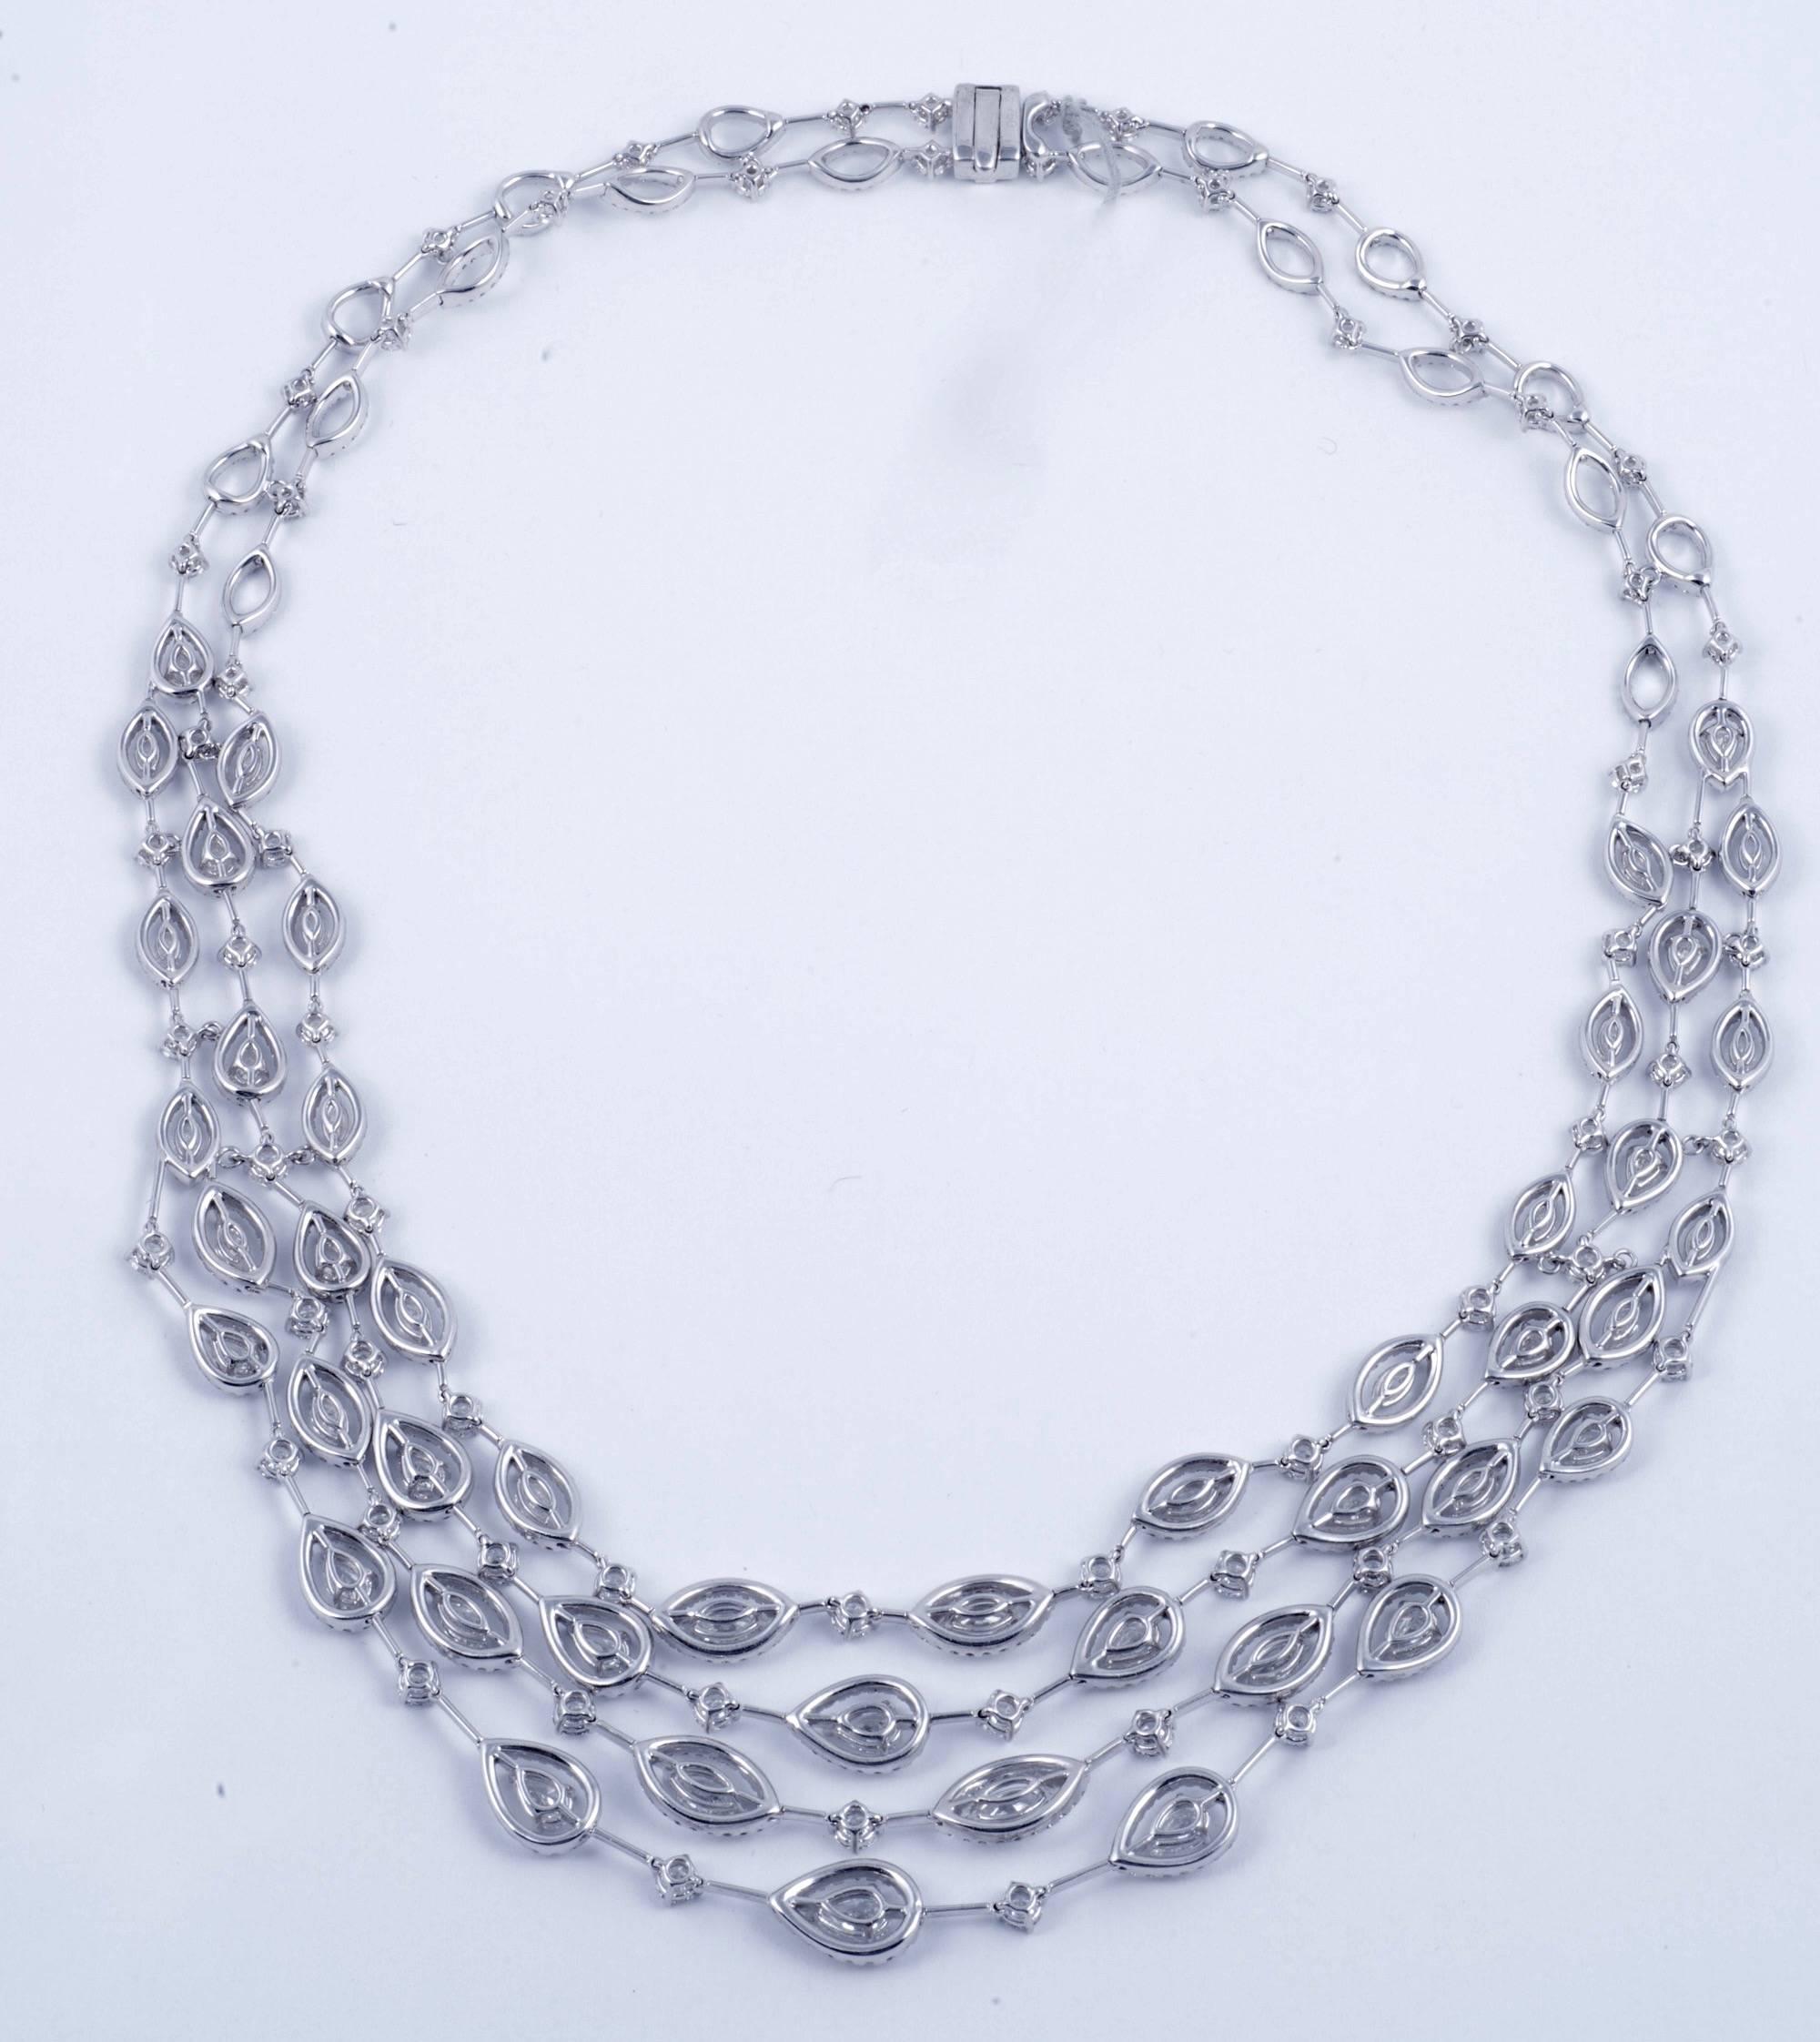 Magnificent Diamond Necklace with Four Stands of Marquise and Pear cut diamonds